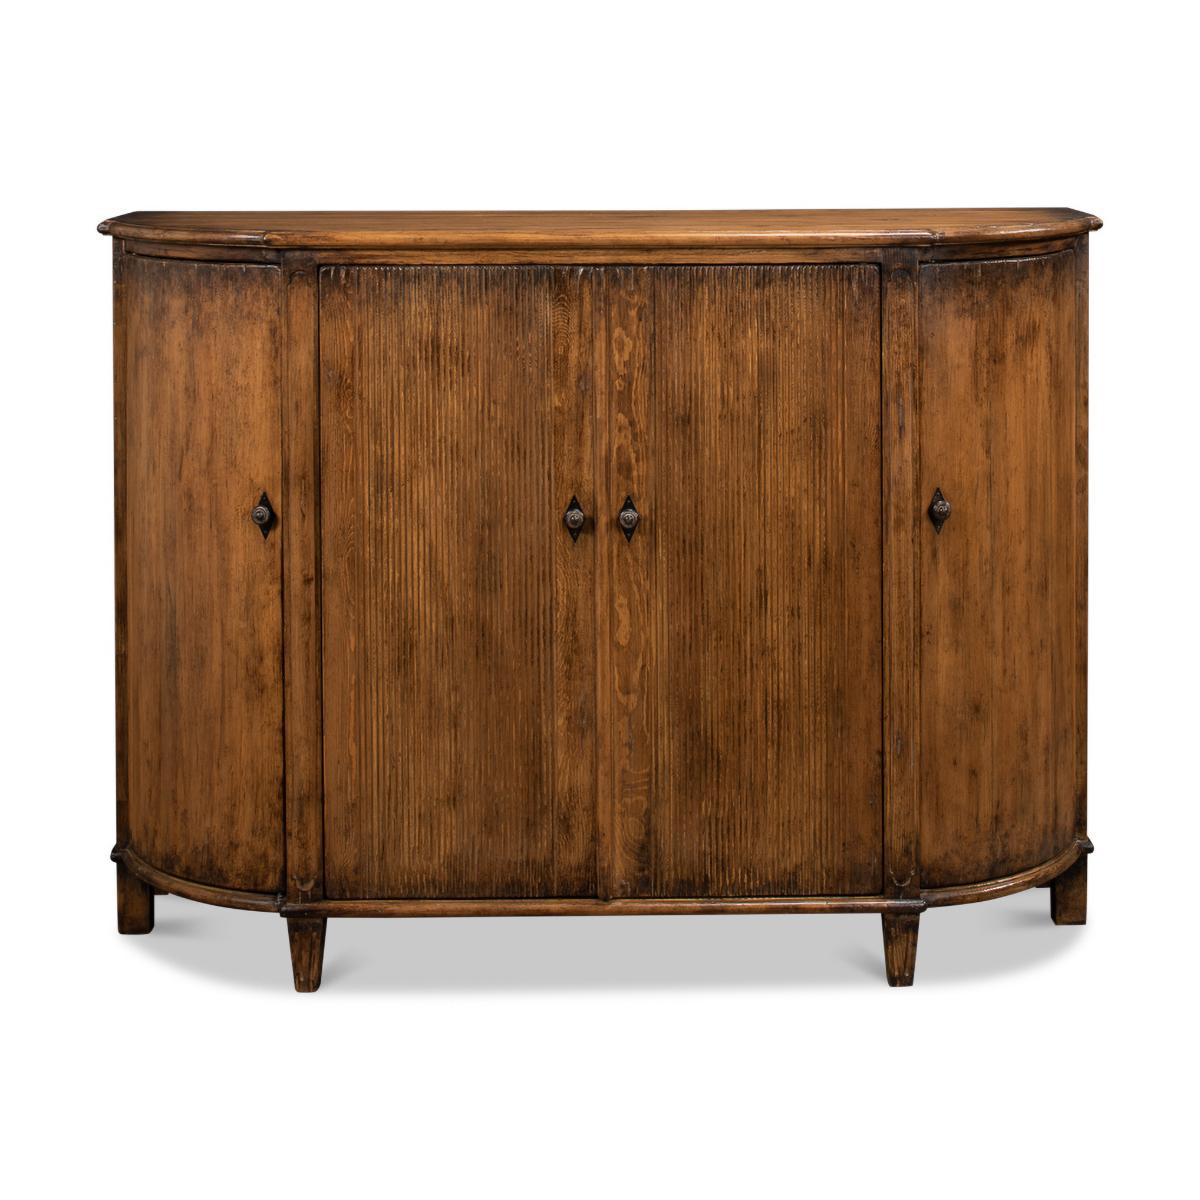 French Country Demilune cabinet with a rustic warm polished finish on pine with curved doors to the sides and two reeded center doors, each section fitted with shelves. 

Dimensions: 63